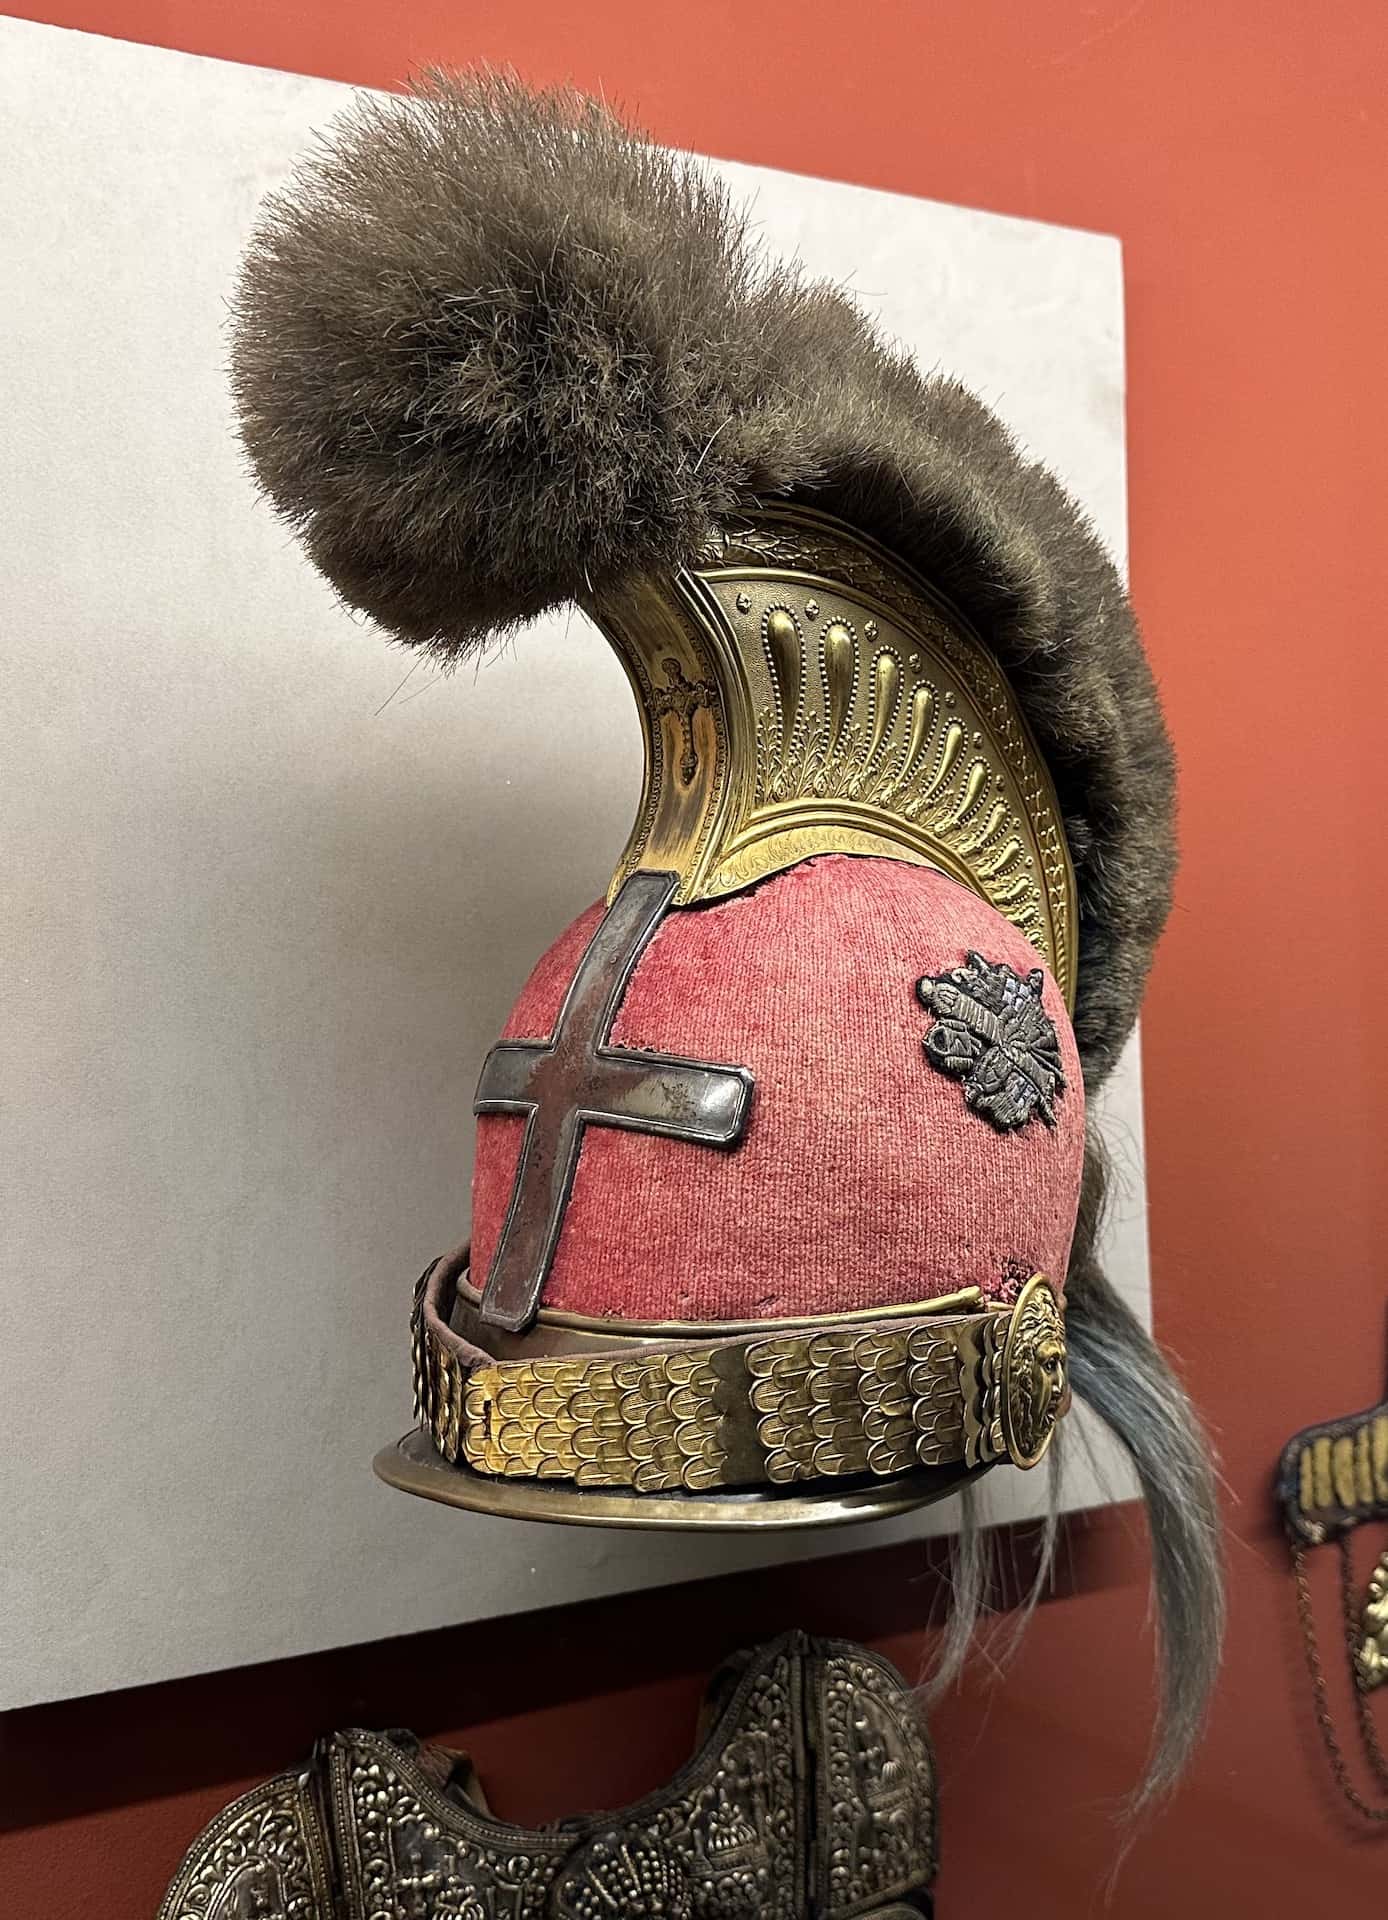 Helmet of Theodoros Kolokotronis at the National Historical Museum in Athens, Greece